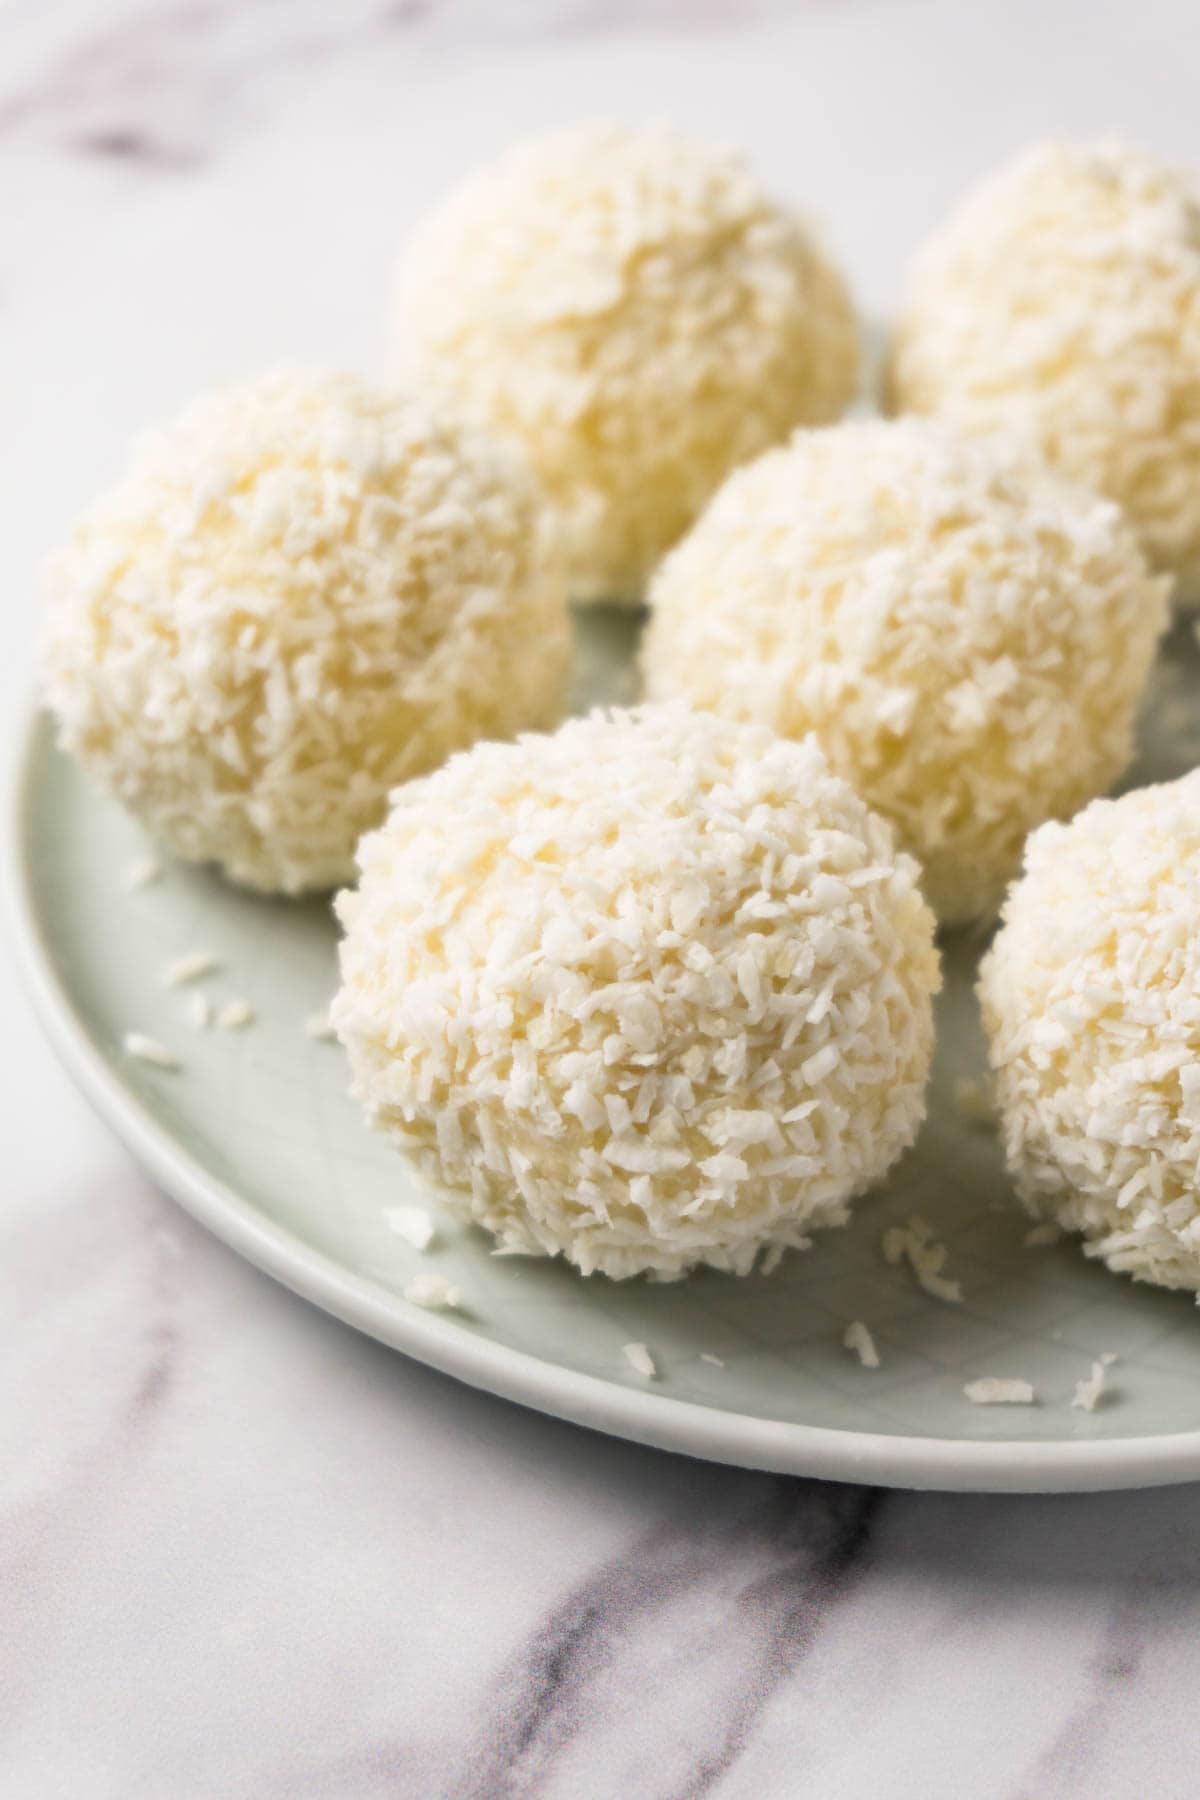 Closeup shot of a small round plate with coconut balls covered in shredded coconut.